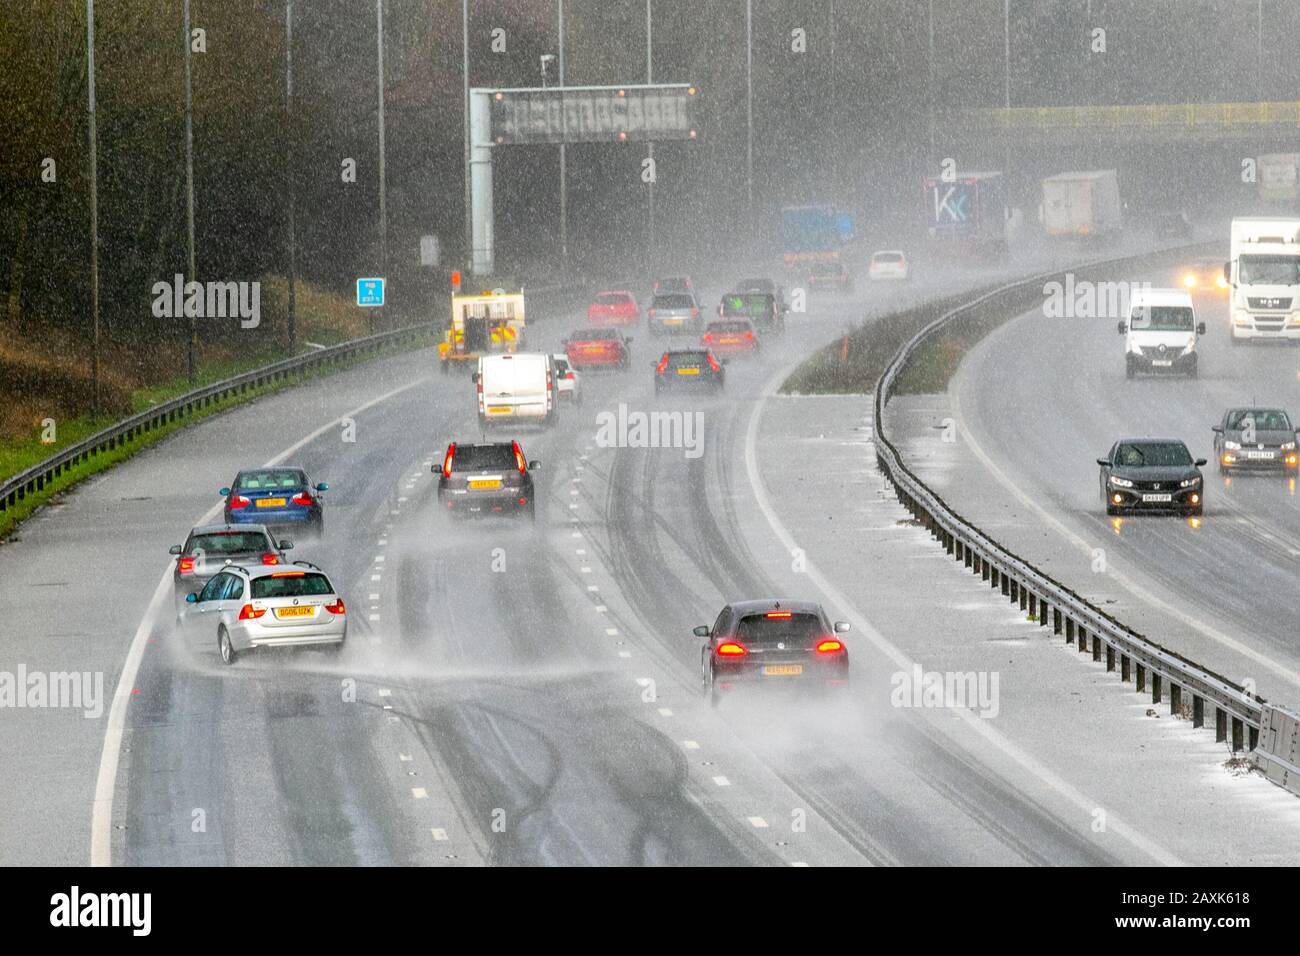 Motorway accident after driving in the middle of a hailstorm in Chorley, Lancashire.  UK Weather. Feb, 2020.  Motorists lose control of their vehicle and crash on M6 motorway after a heavy microburst hailstorm makes for difficult driving conditions. The lucky BMW driver hit the Armco Crash Barrier, collided on the hard shoulder and finished facing oncoming traffic. Stock Photo